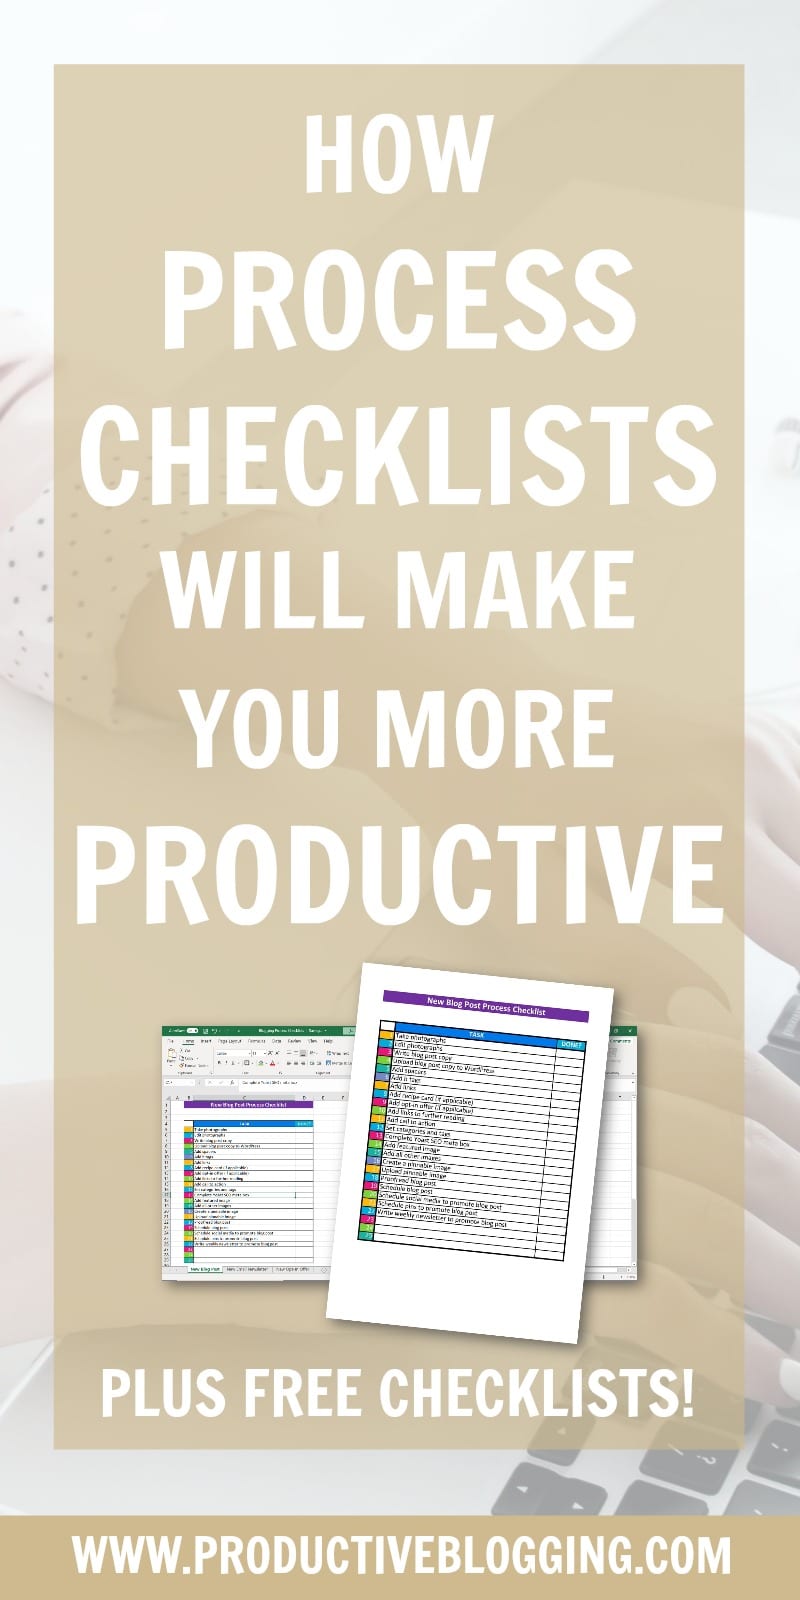 Want to waste less time? Do your tasks in the most efficient order? Avoid wasted opportunities? Here’s how process checklists will make you more productive and how to make them! Plus grab my FREE done-for-you process checklists. #productivity #timemanagement #processchecklists #projectmanagement #checklists #bloggingchecklists #freebloggingchecklists #bloggingtips #blogginghacks #solopreneur #productivitytips #productivityhacks #productiveblogging #productiveblogger #productivesolopreneur